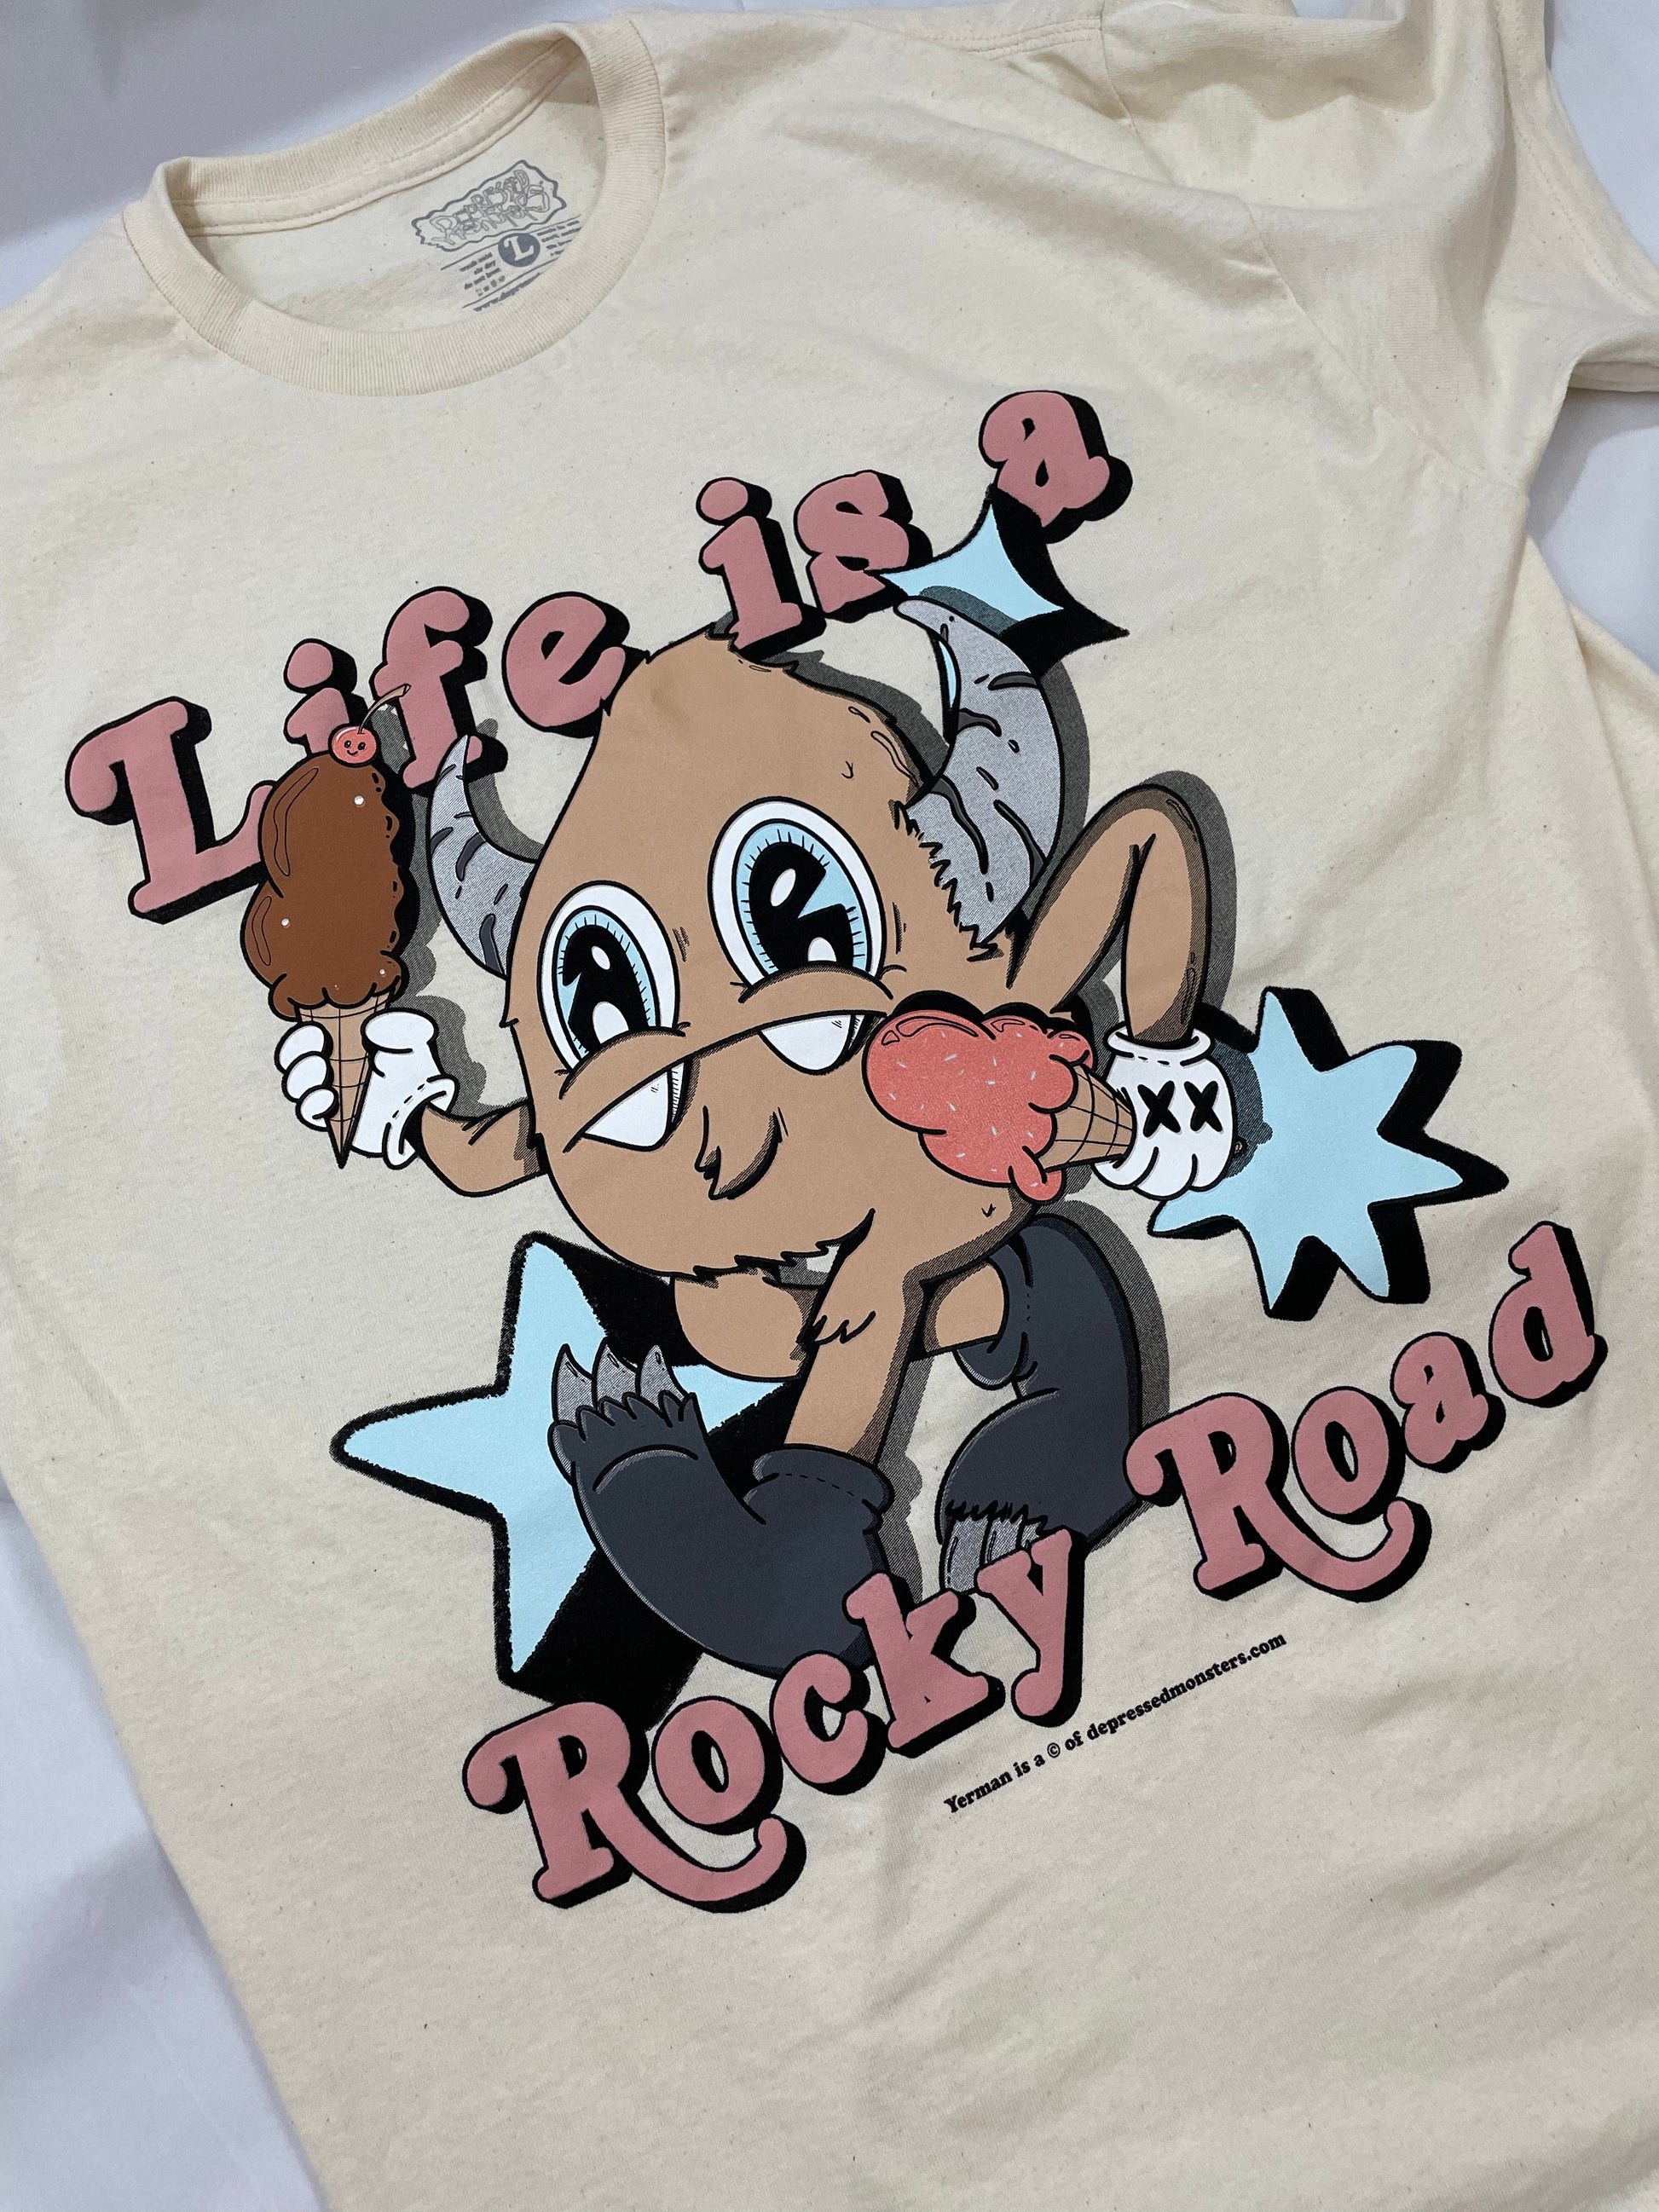 "Life Is A Rocky Road" - Depressed Monsters